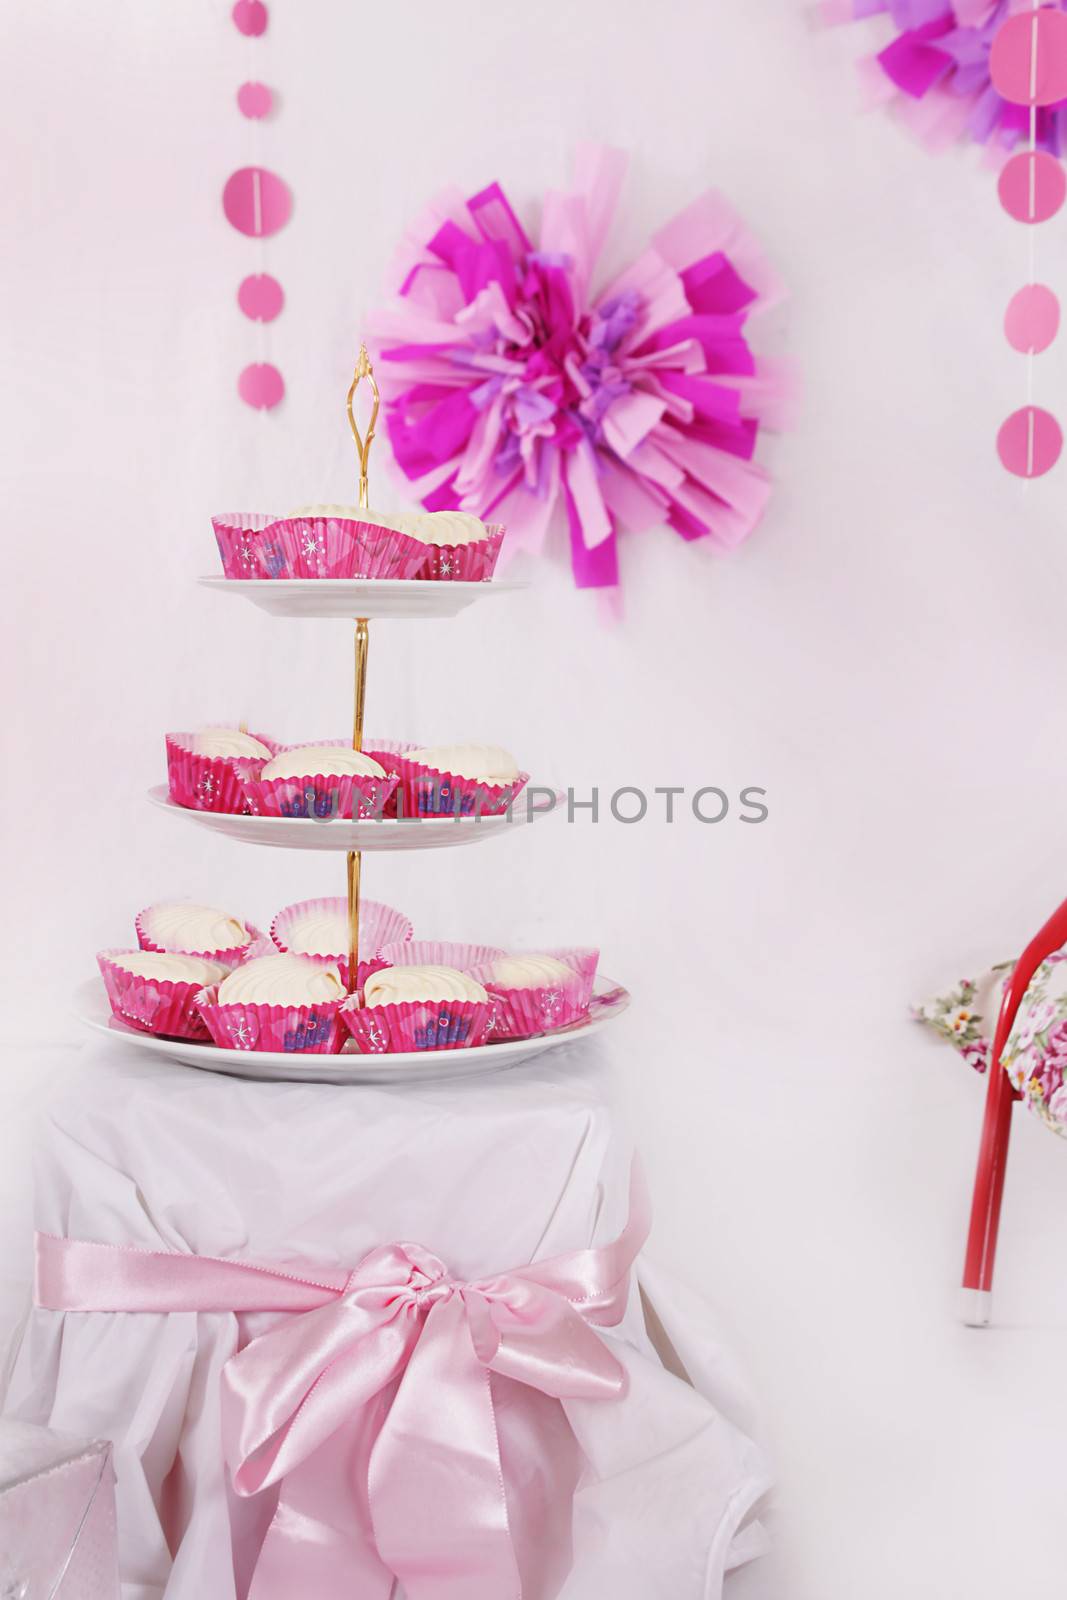 Dessert table with sweets for party by Angel_a